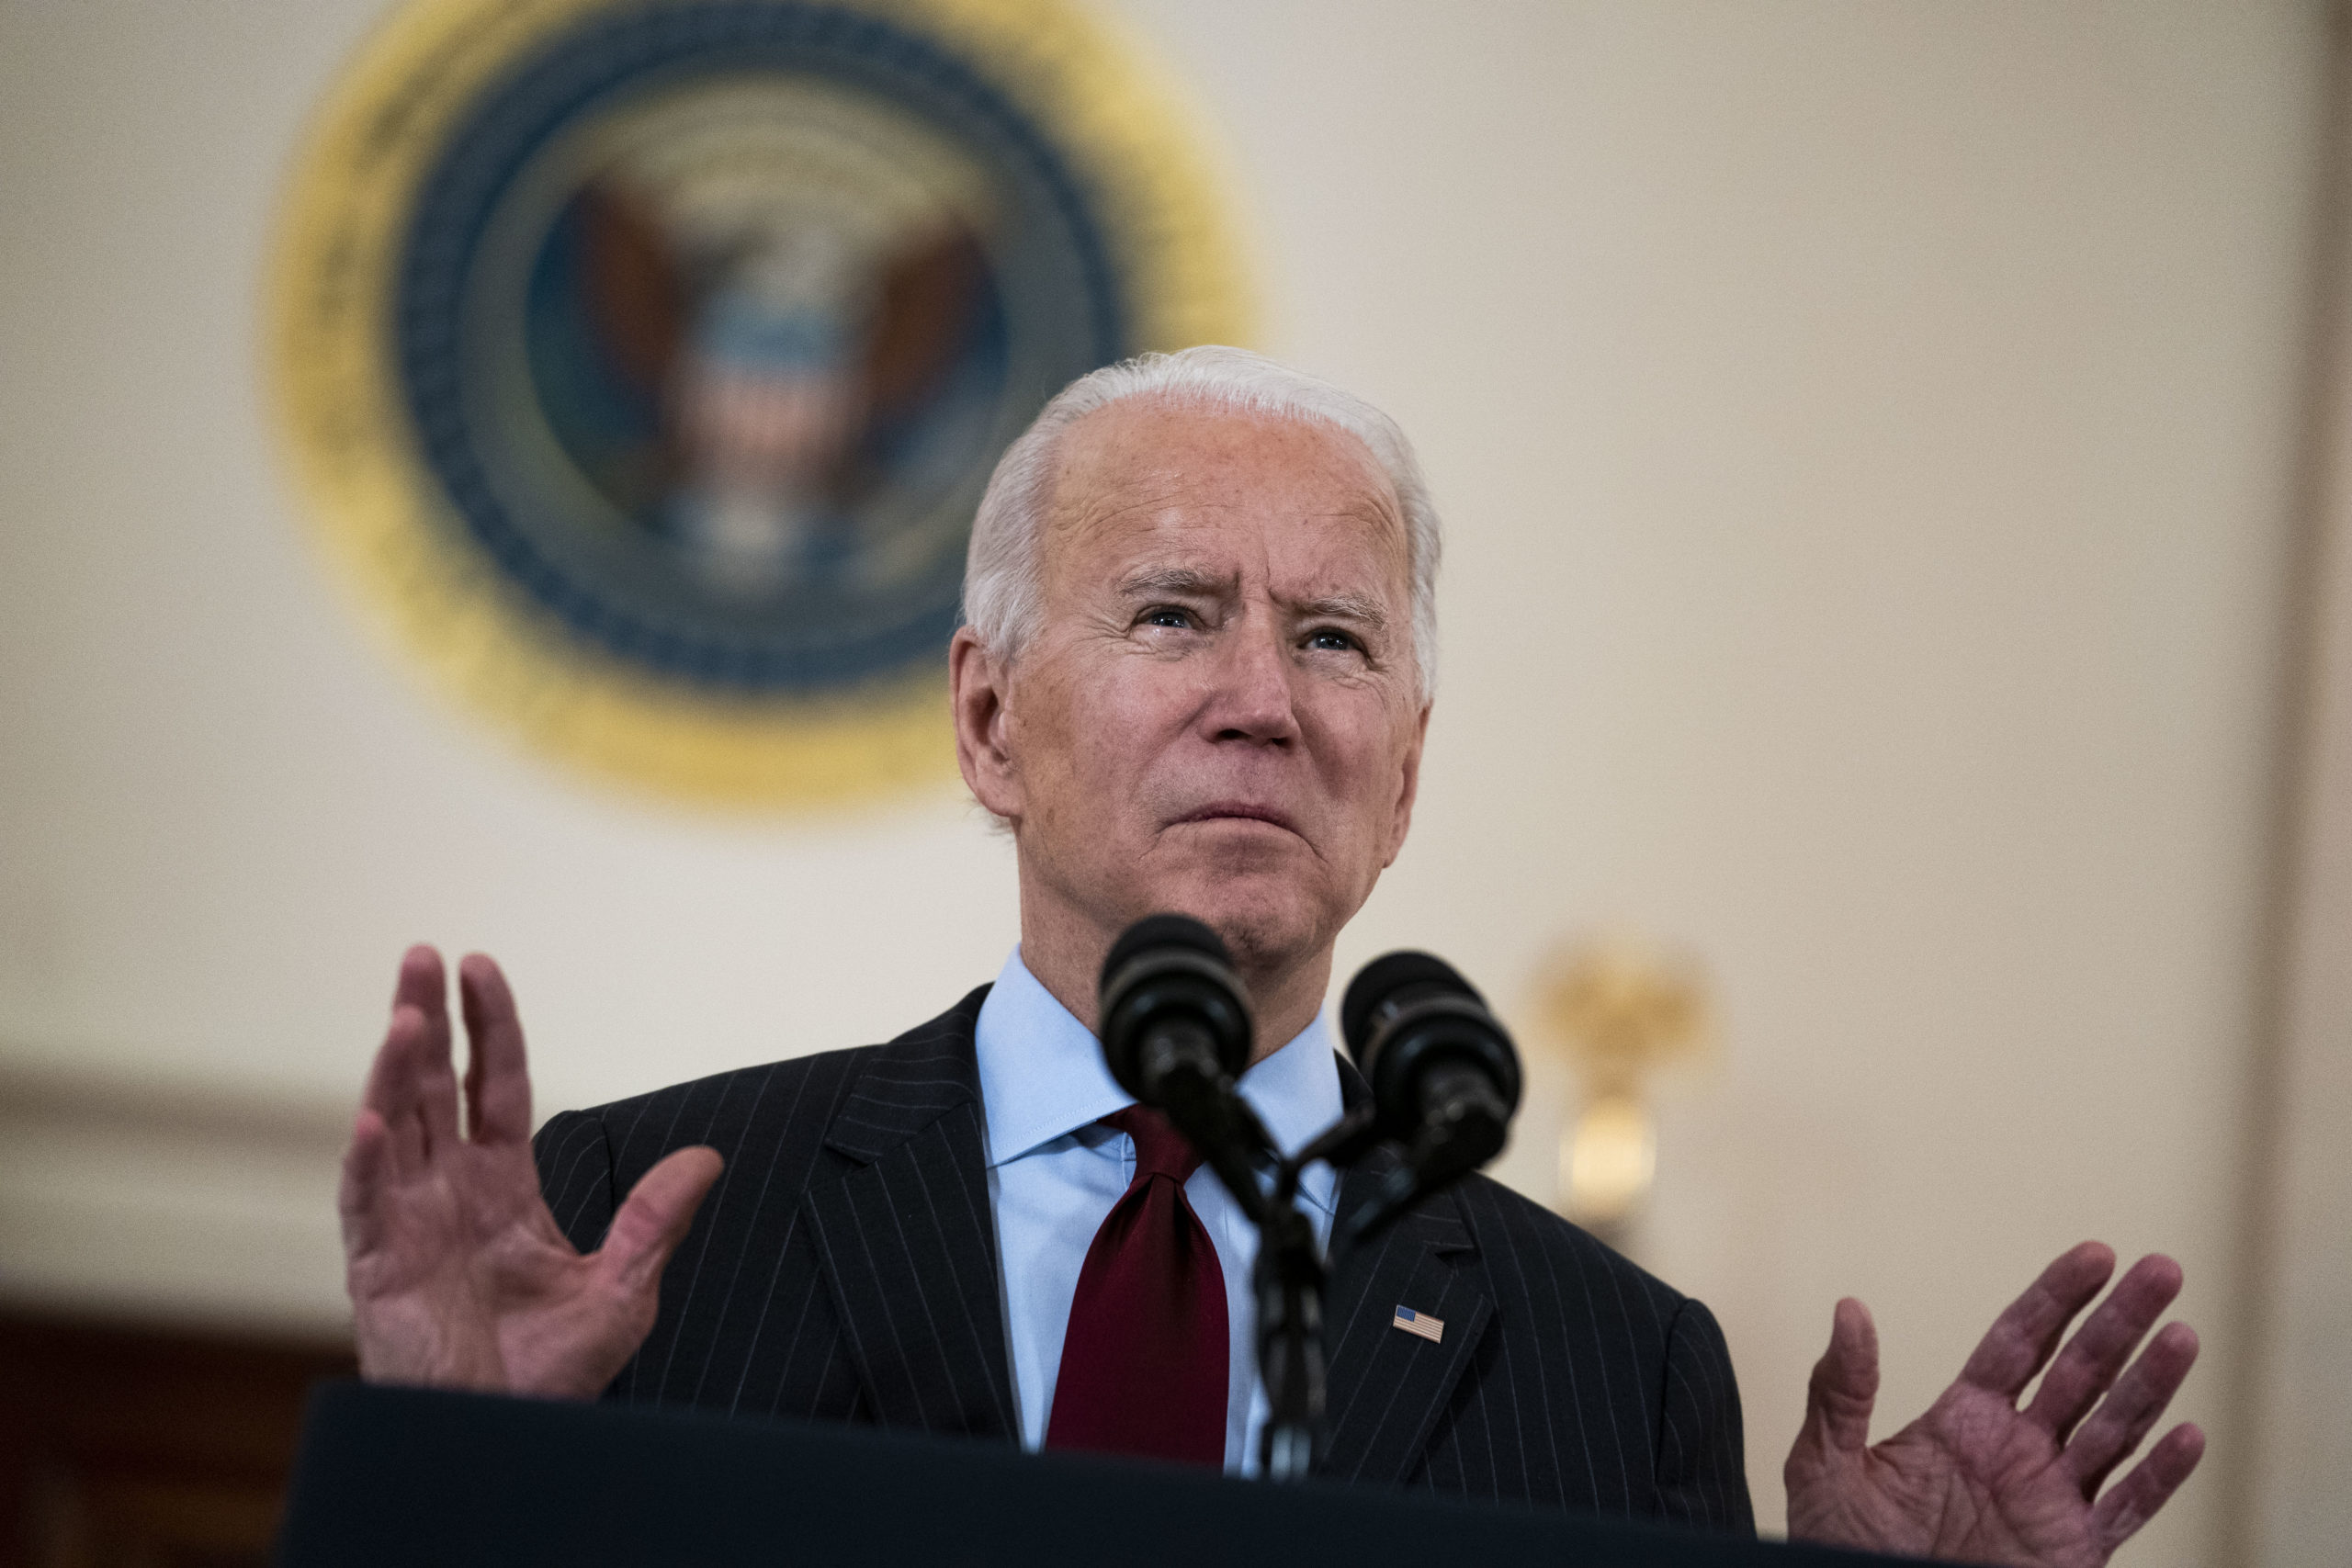 WASHINGTON, DC - FEBRUARY 22: U.S. President Joe Biden delivers remarks on the more than 500,000 lives lost to COVID-19 in the Cross Hall of the White House February 22, 2021 in Washington, DC. Also on hand for the ceremony were first lady Jill Biden, Vice President Kamala Harris and husband Doug Emhoff. (Photo by Doug Mills-Pool/Getty Images)